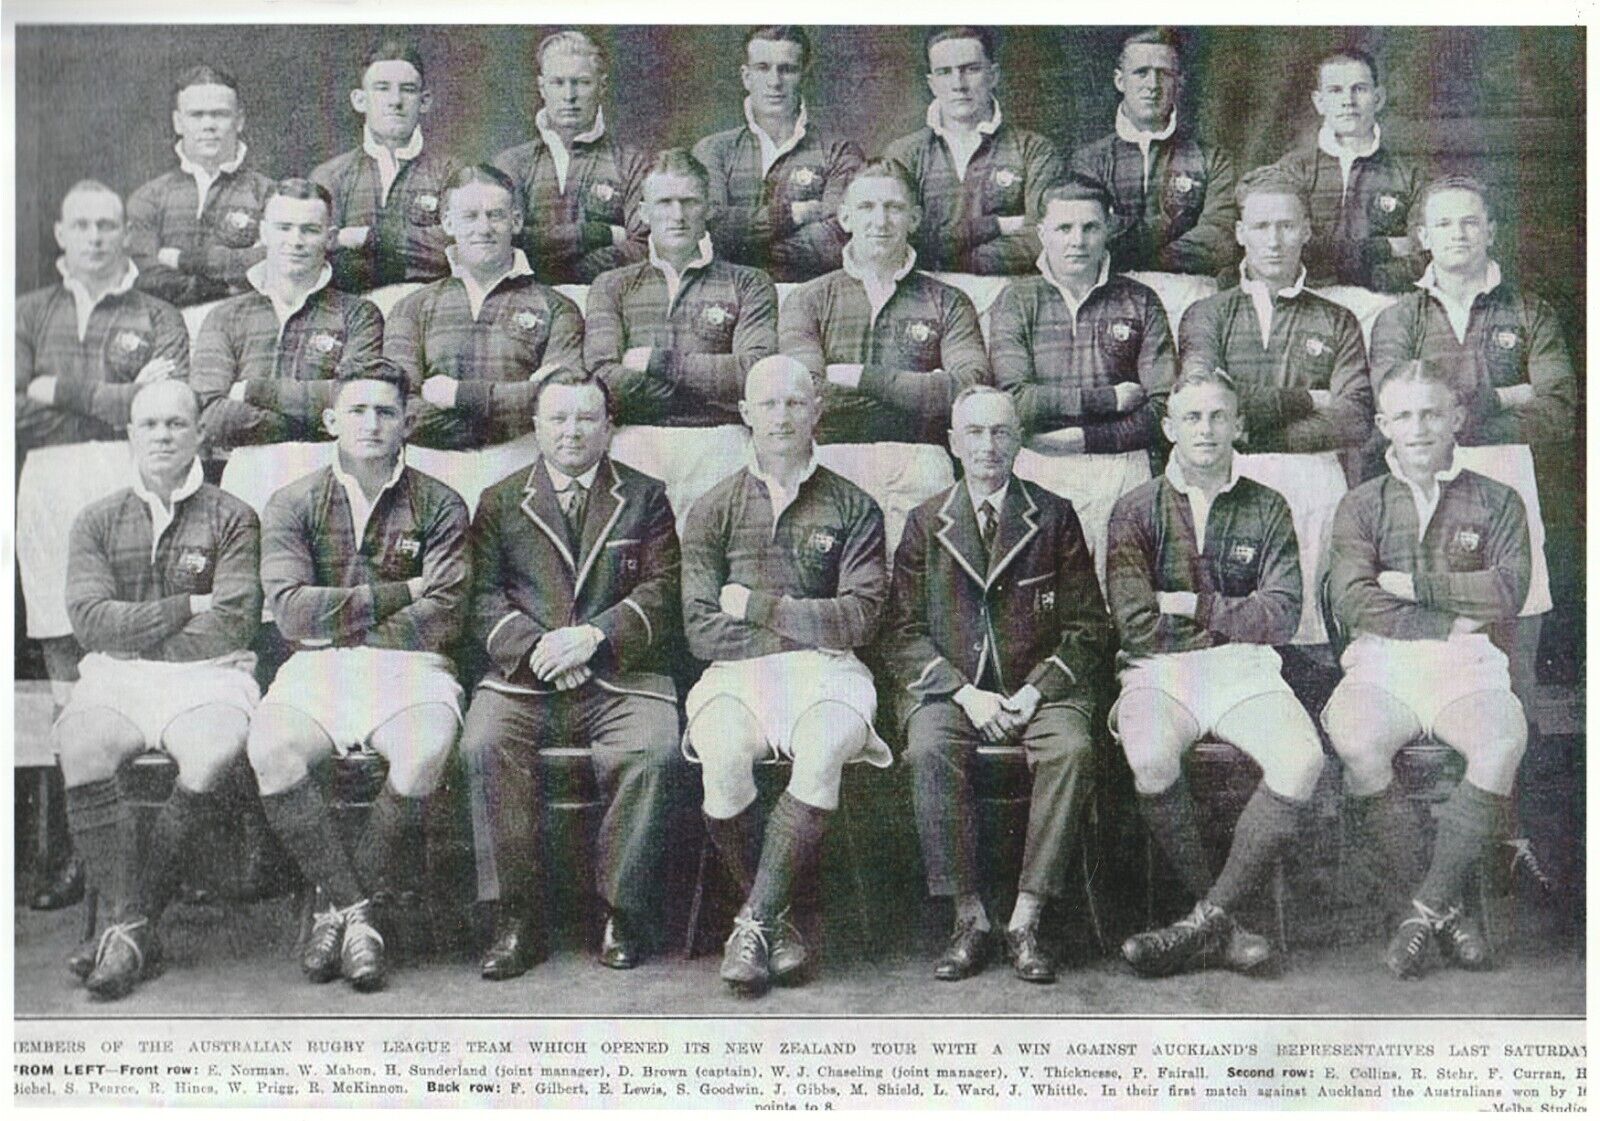 PHOTOGRAPH , SPORT , AUSTRALIAN RUGBY LEAGUE TEAM , 1935? , ALL PLAYERS NAMED